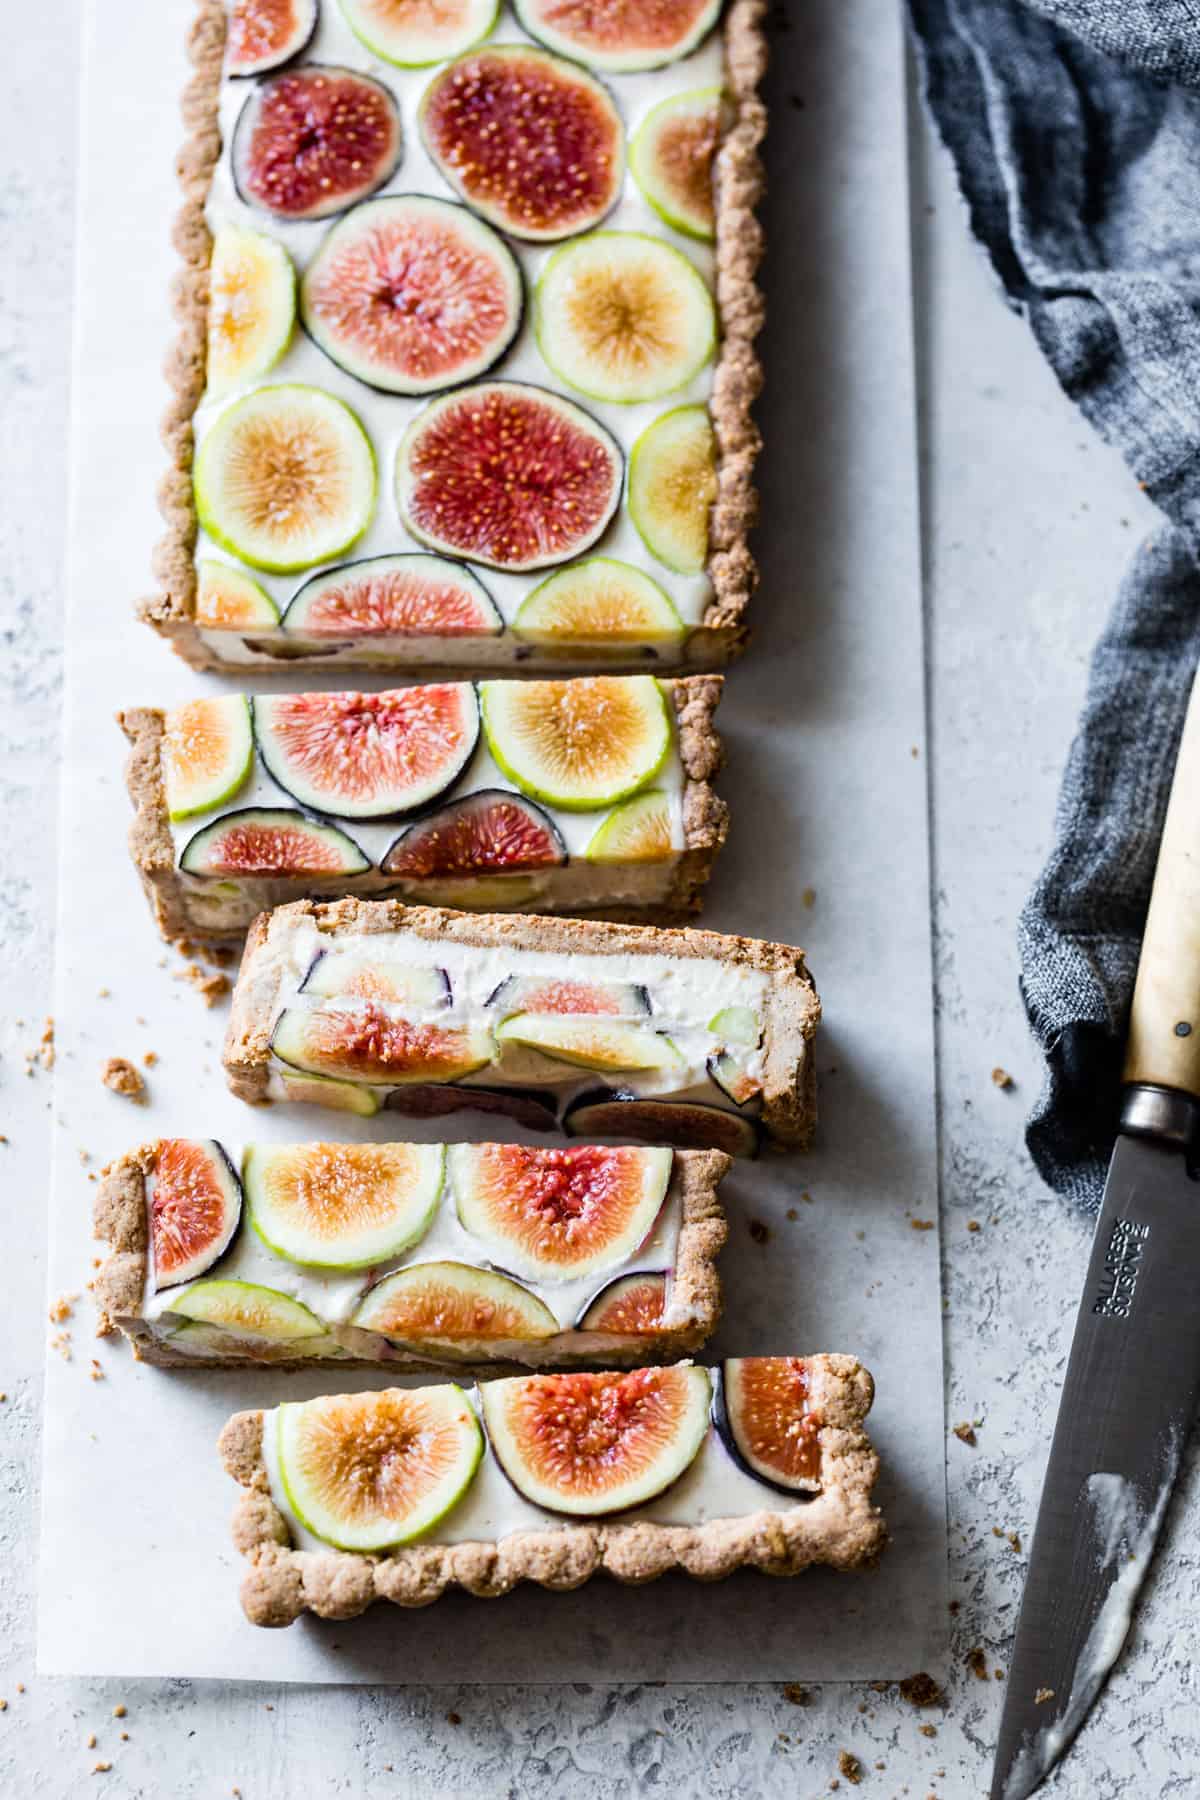 Gluten-free fig tart, sliced, on a gray stone surface